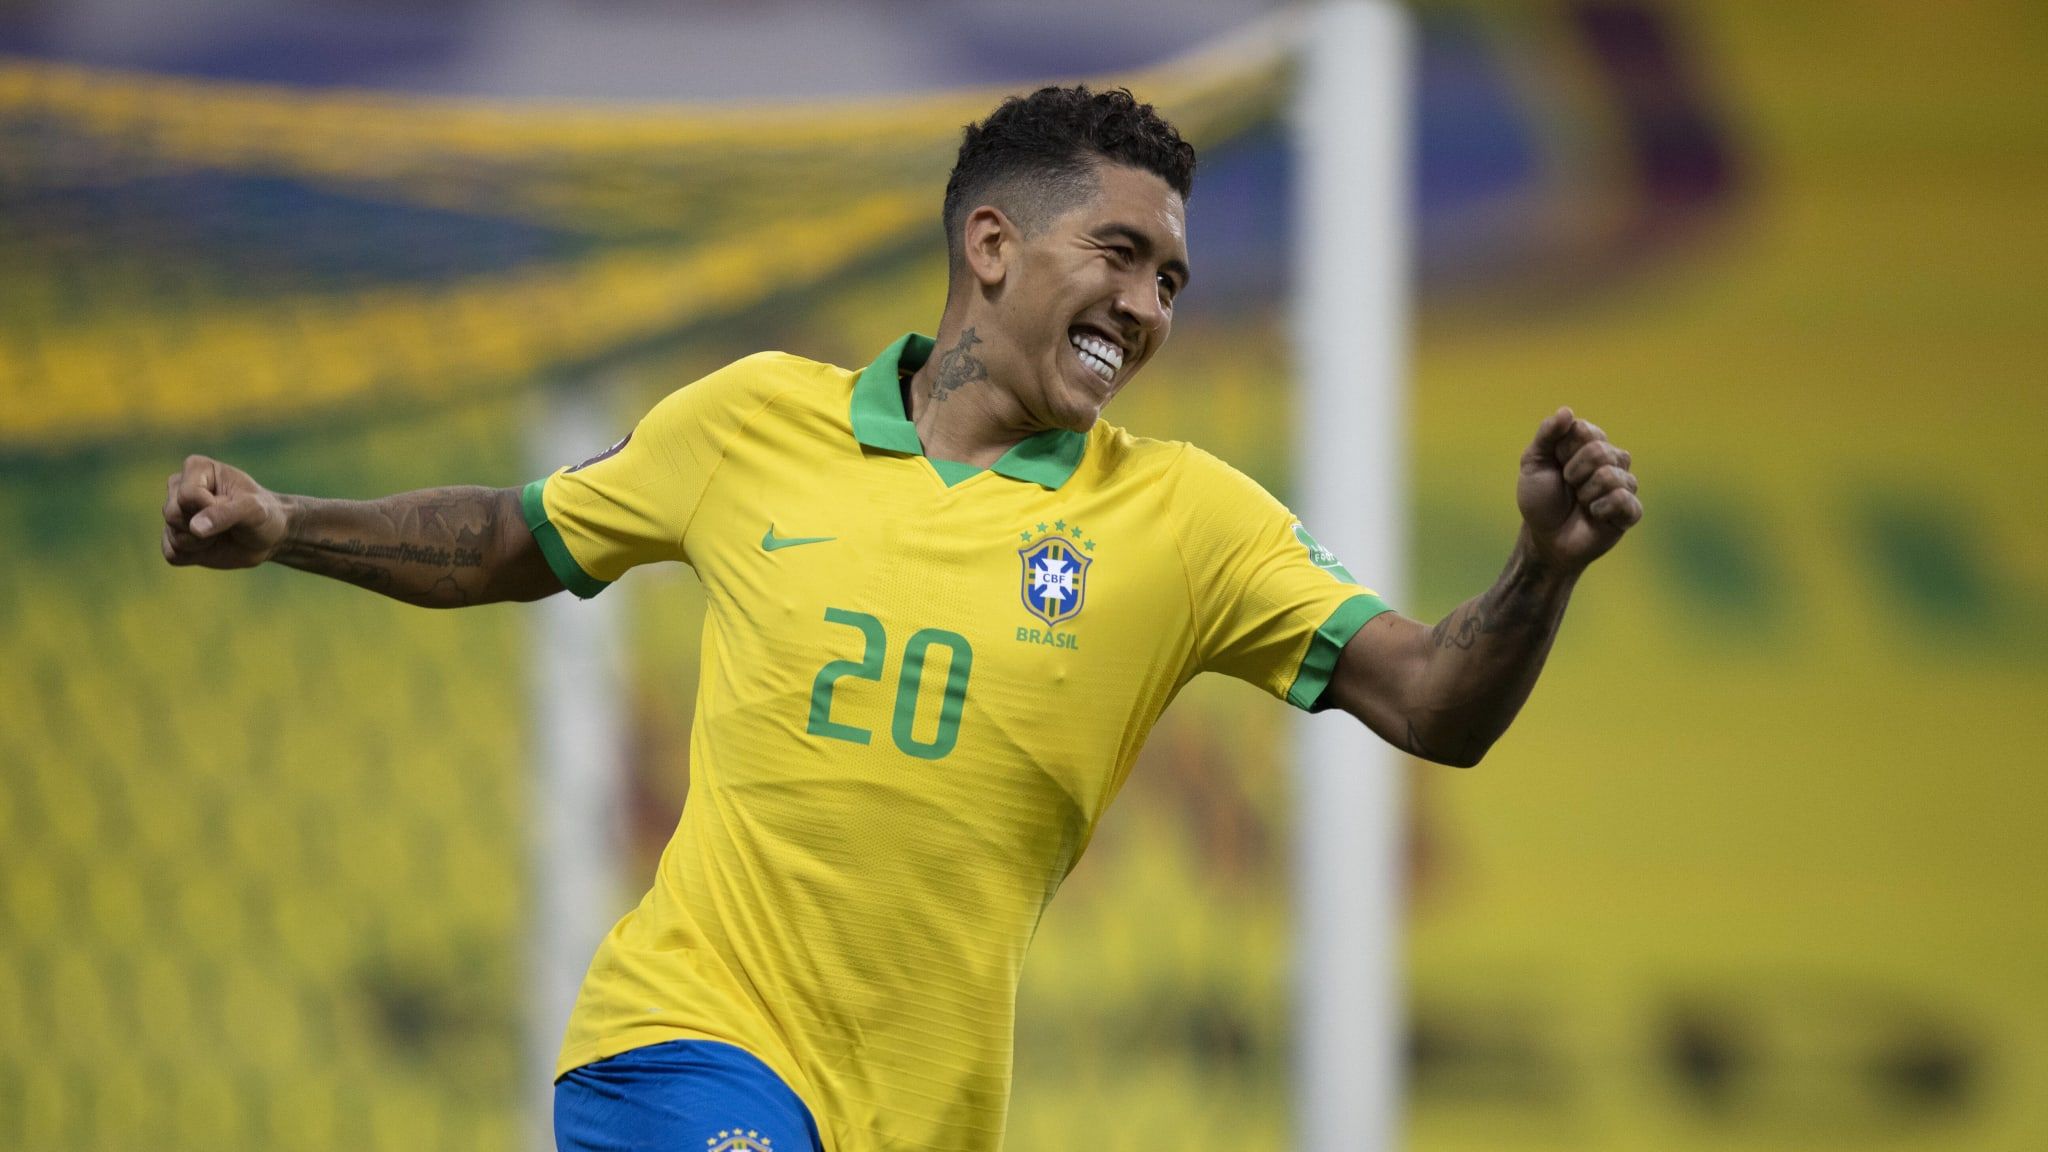 FIFA World Cup 2022™: I want to be the No9 Brazil can rely on